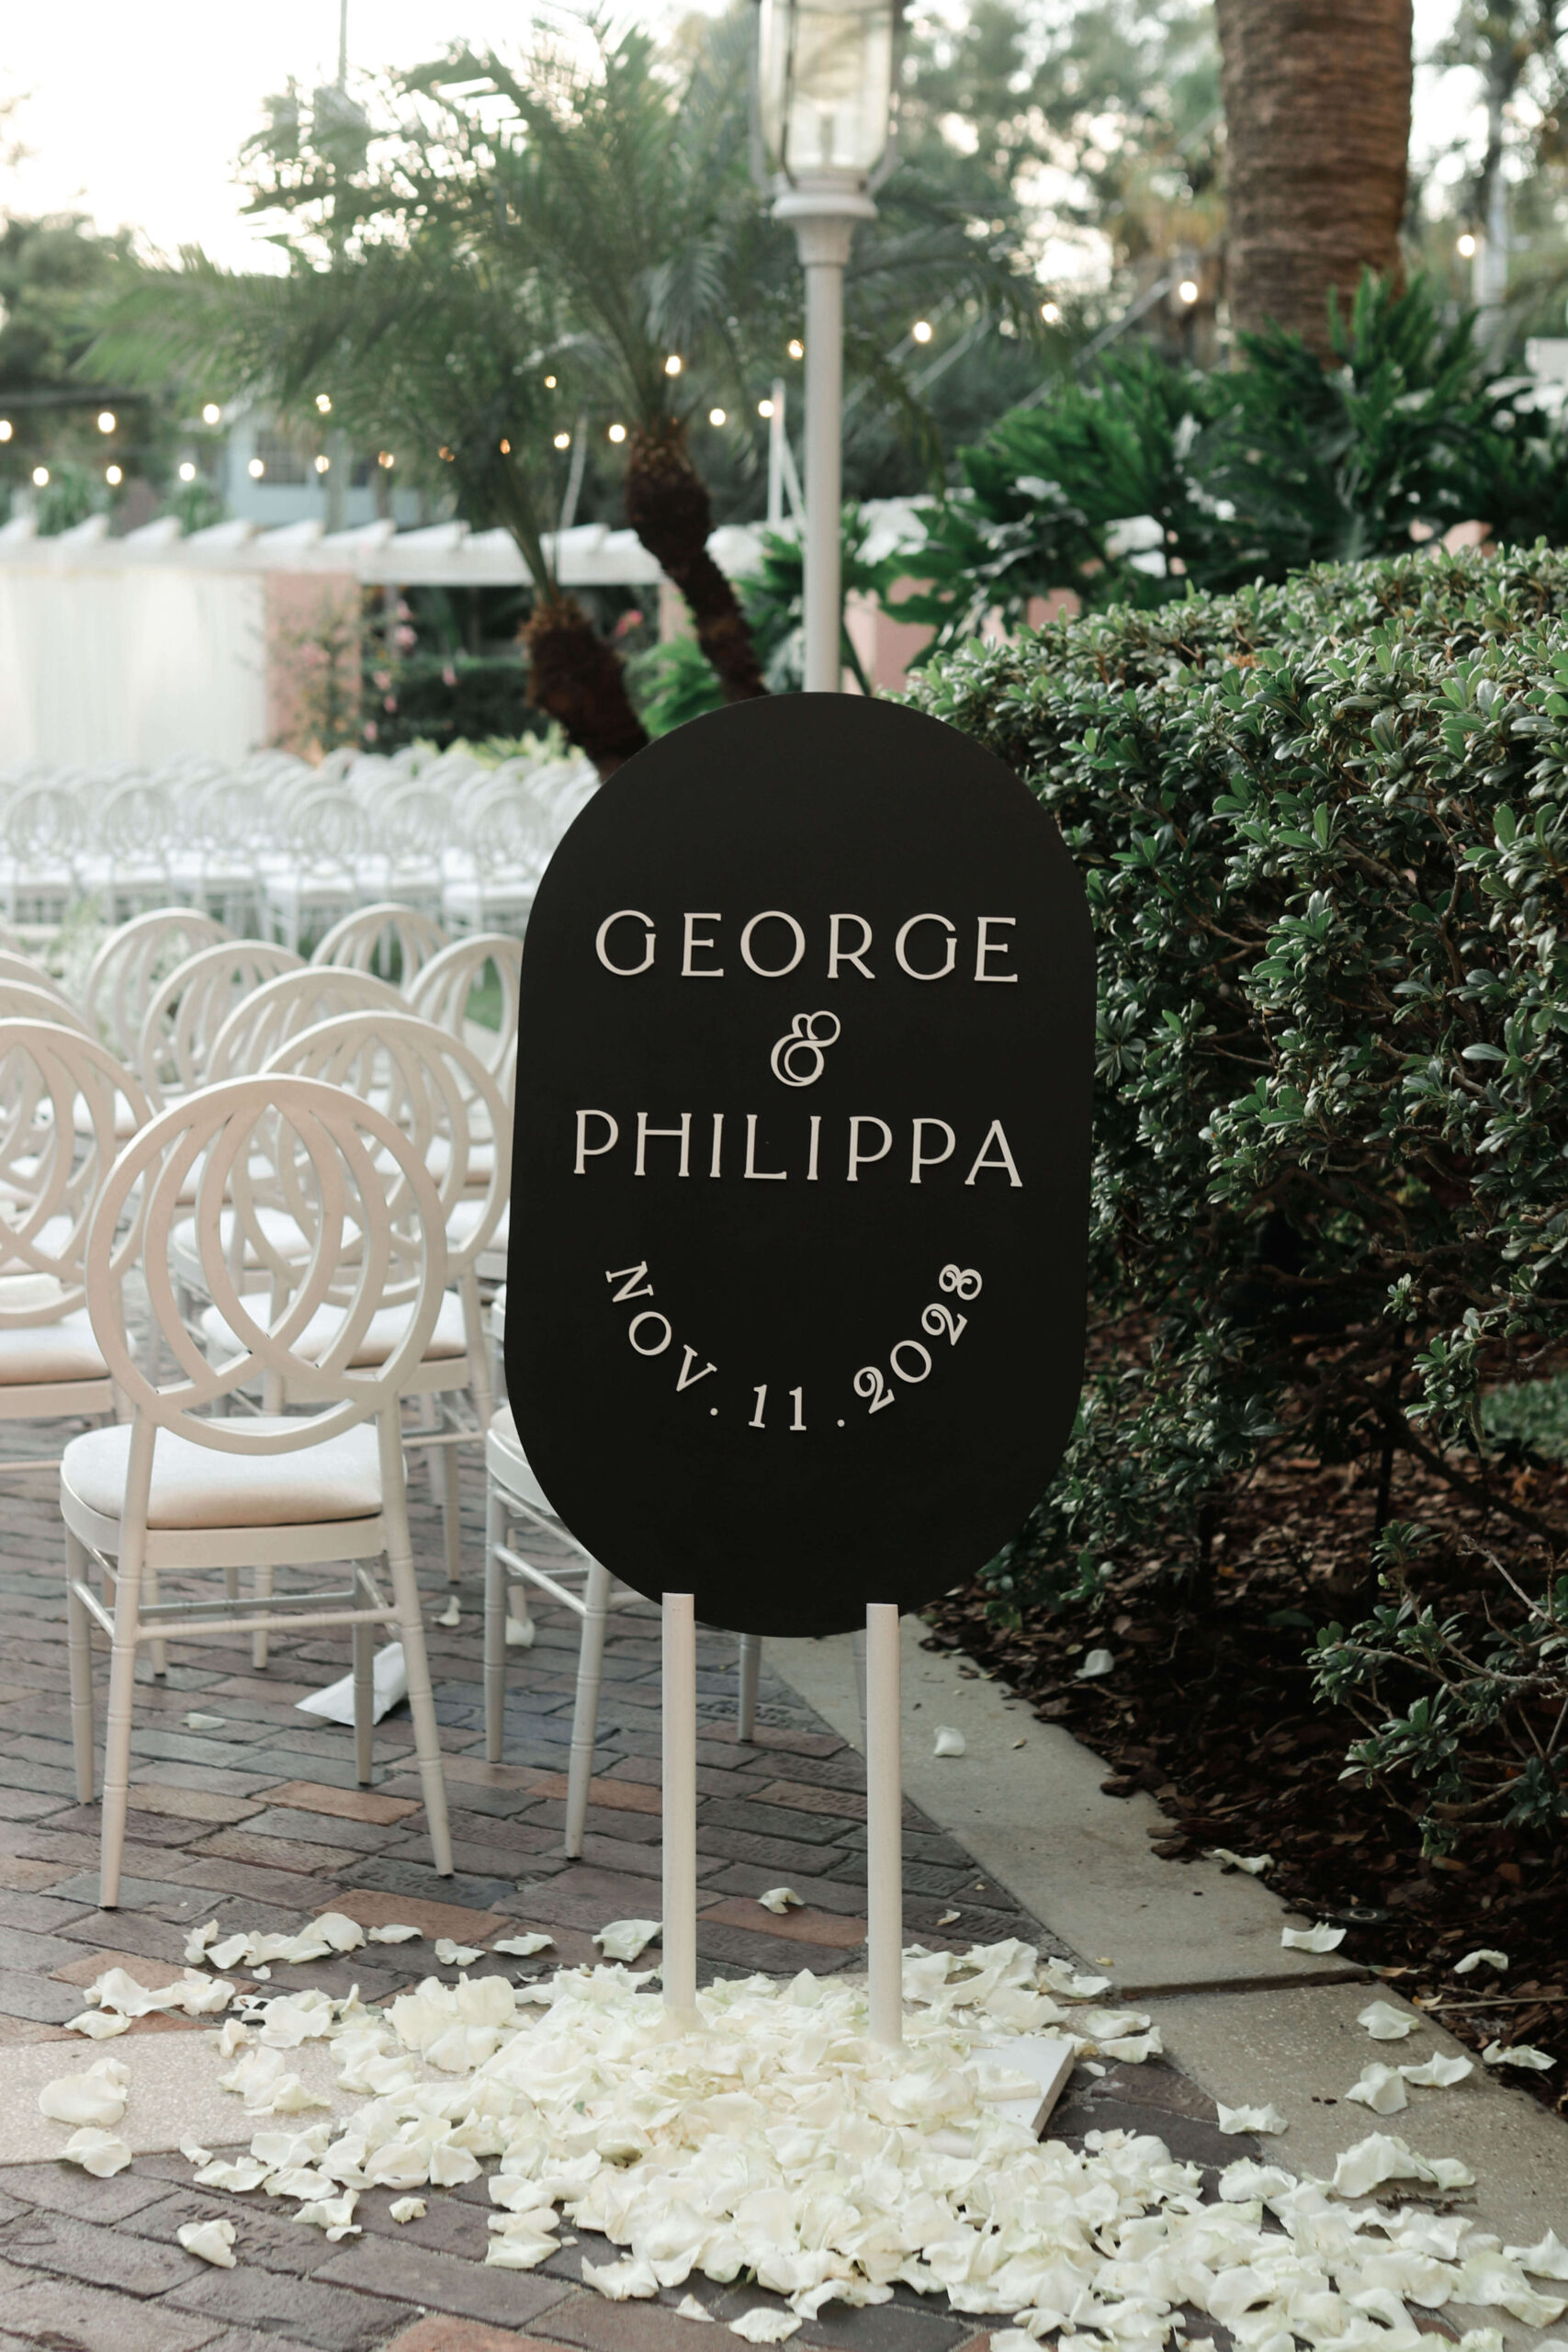 Wedding welcome sign that says "George and Philippa" in a pool of rose petals